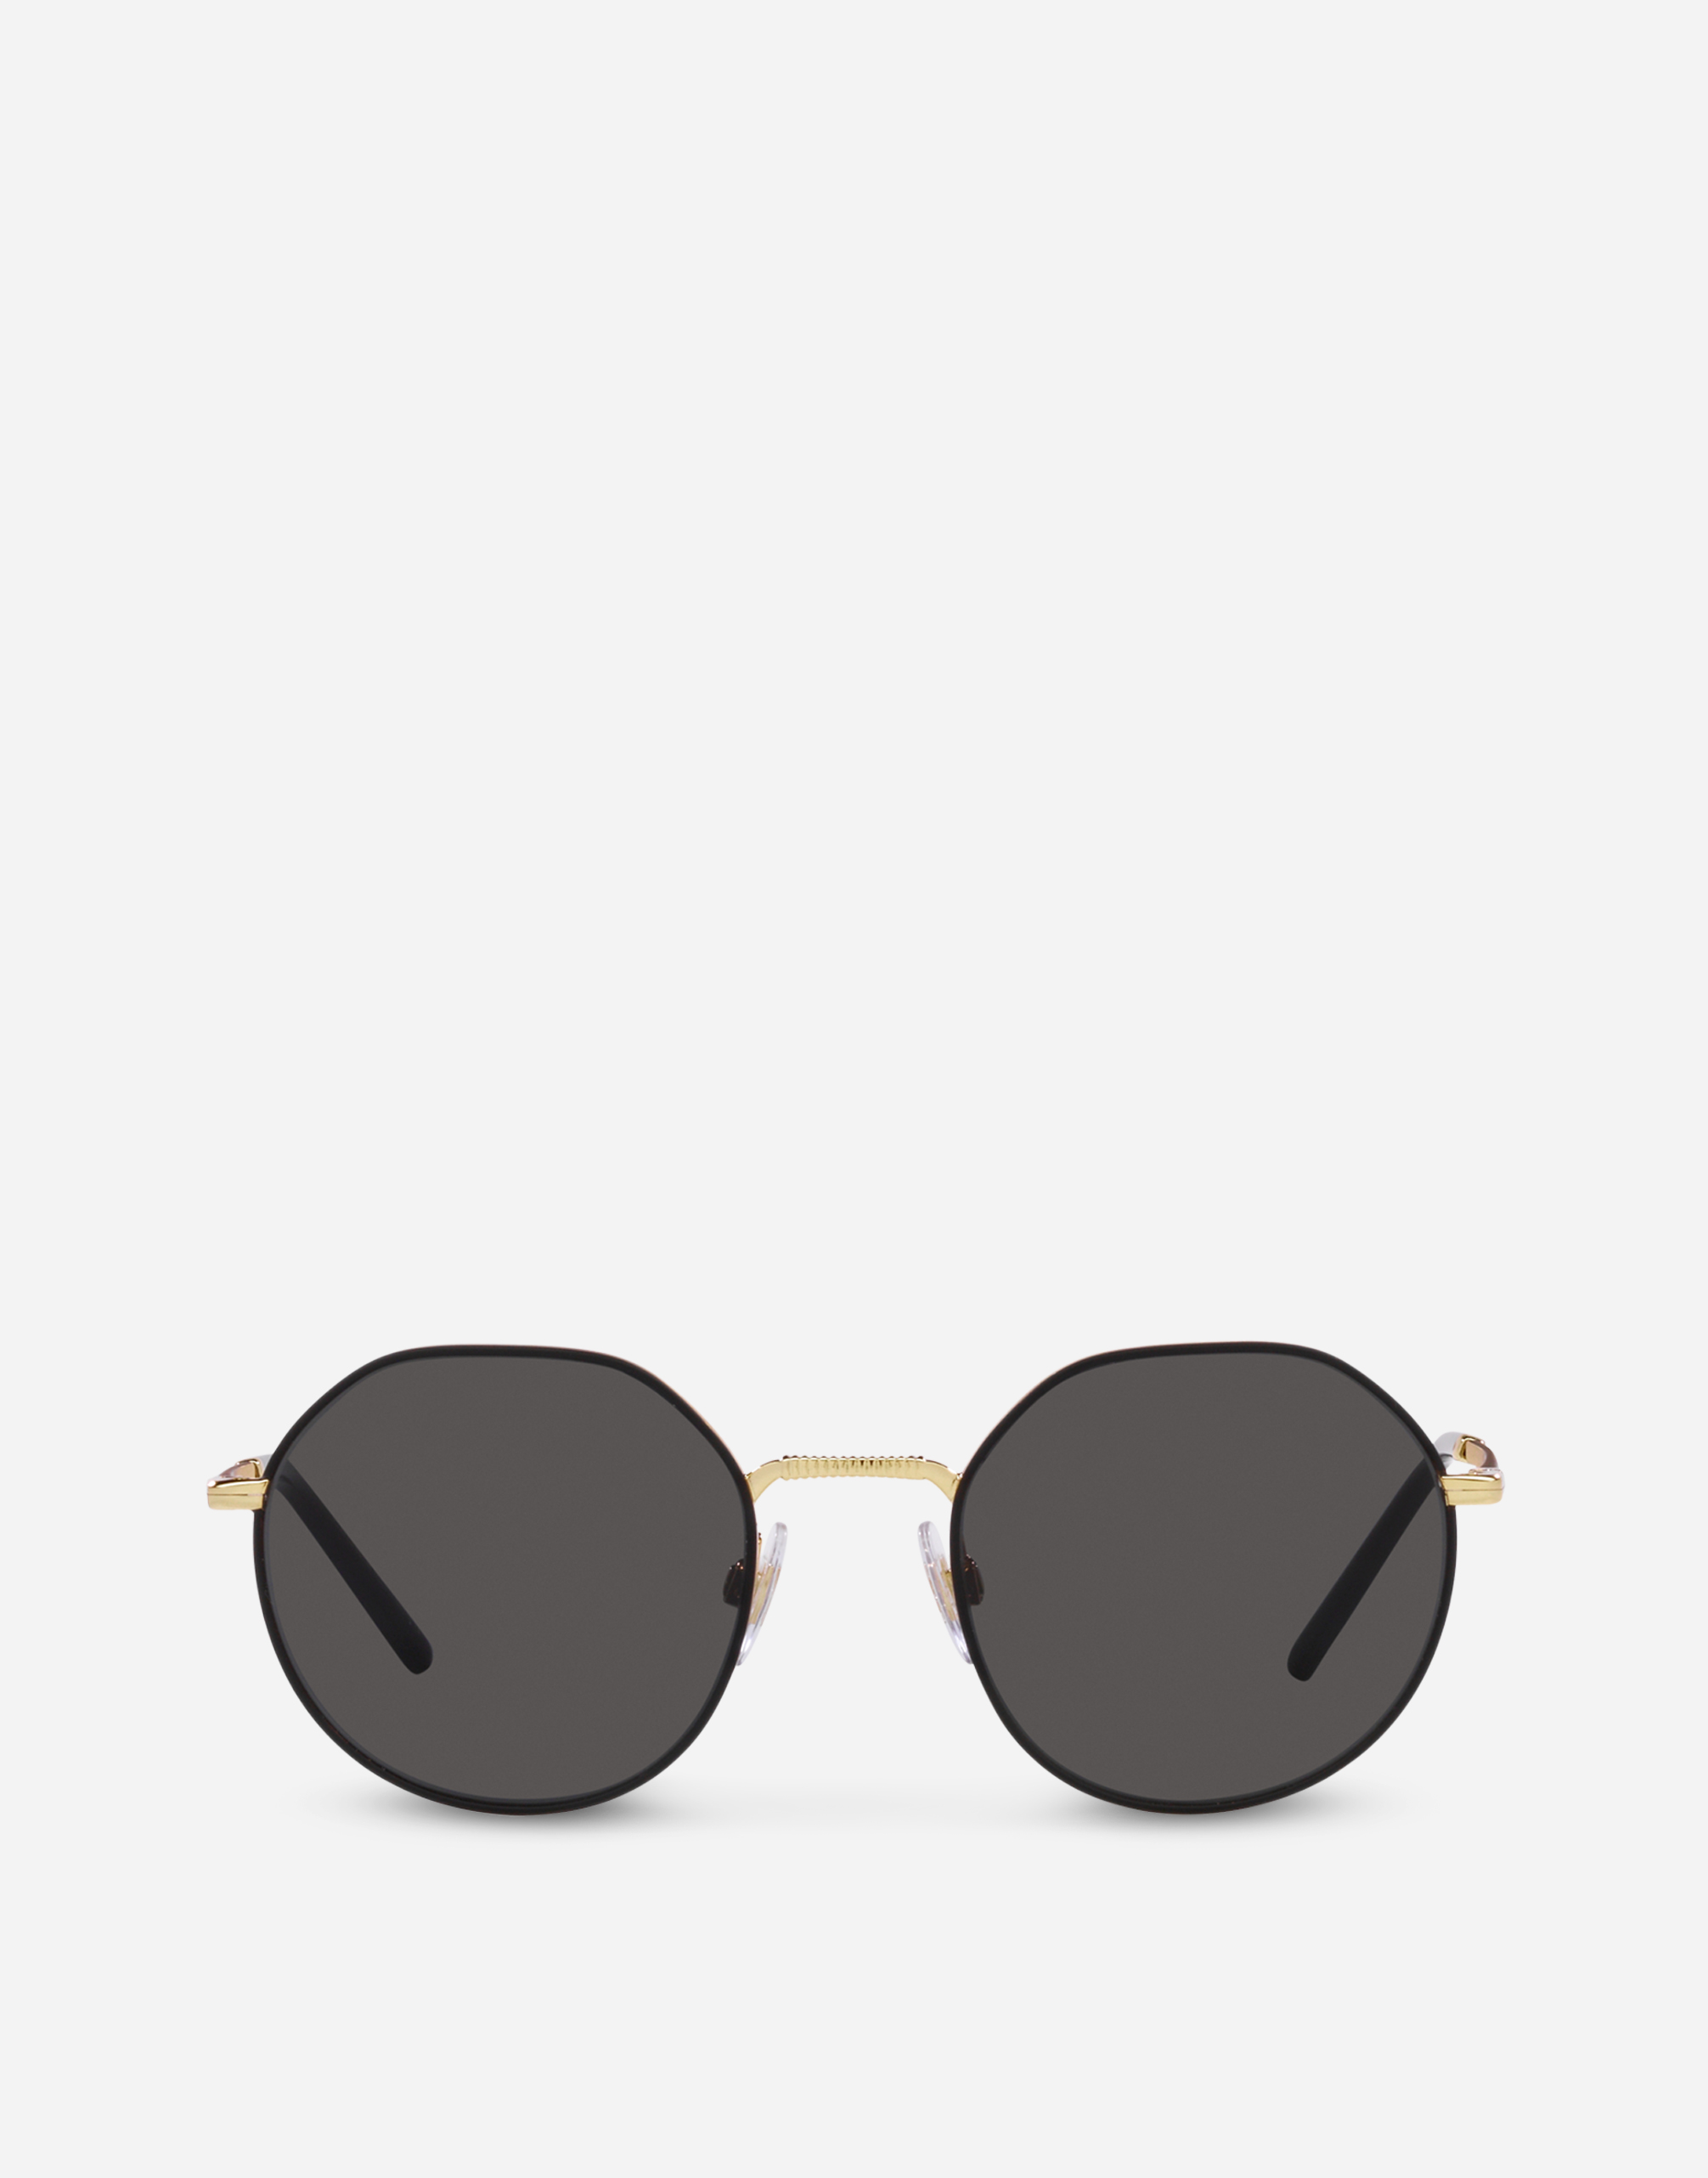 Gros grain sunglasses in Gold and black